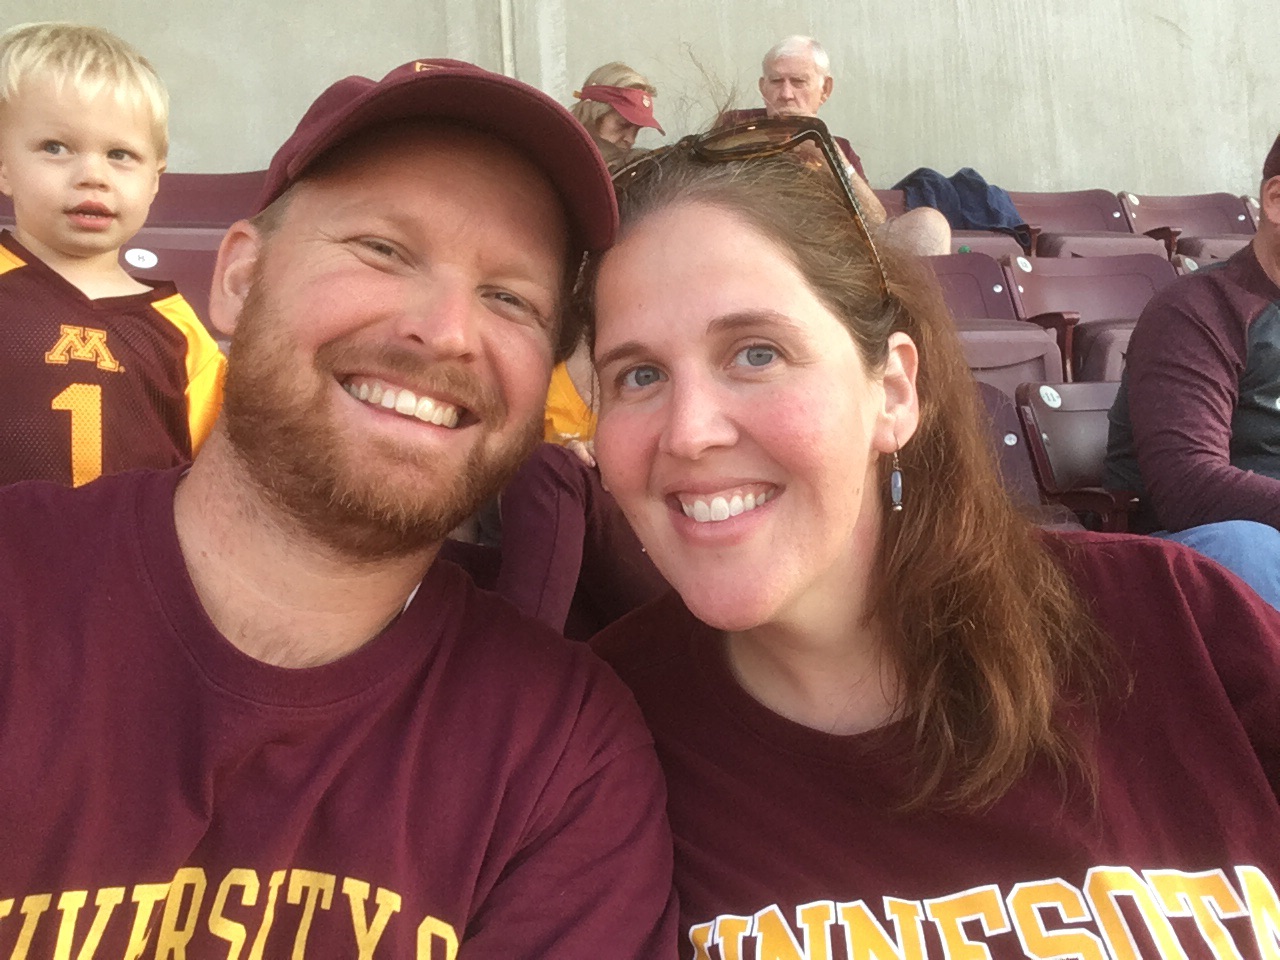 Pictured, Noelle Noonan, vice chair, P&A Consultative Committee and her husband _______. Senate Associate Chris Kwapick's son, Henry, pictured behind Noelle and John takes in the football scene.